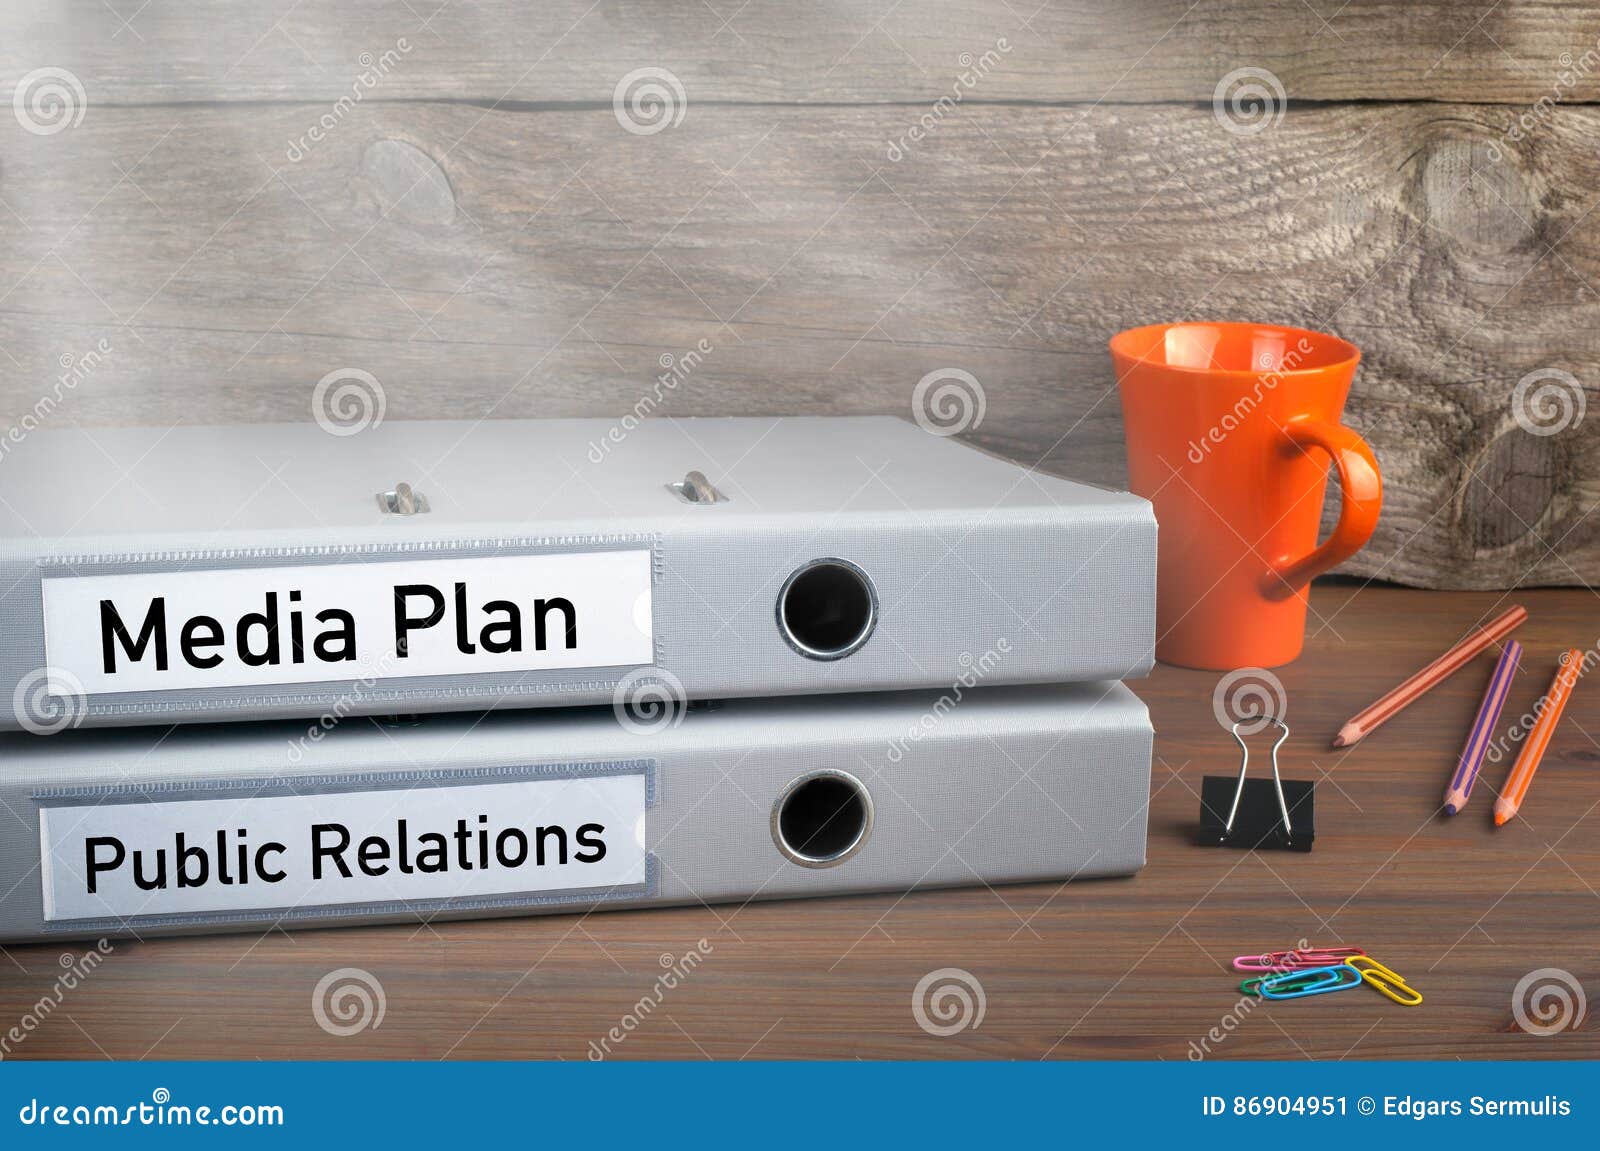 public relations and media plan - two folders on wooden office desk